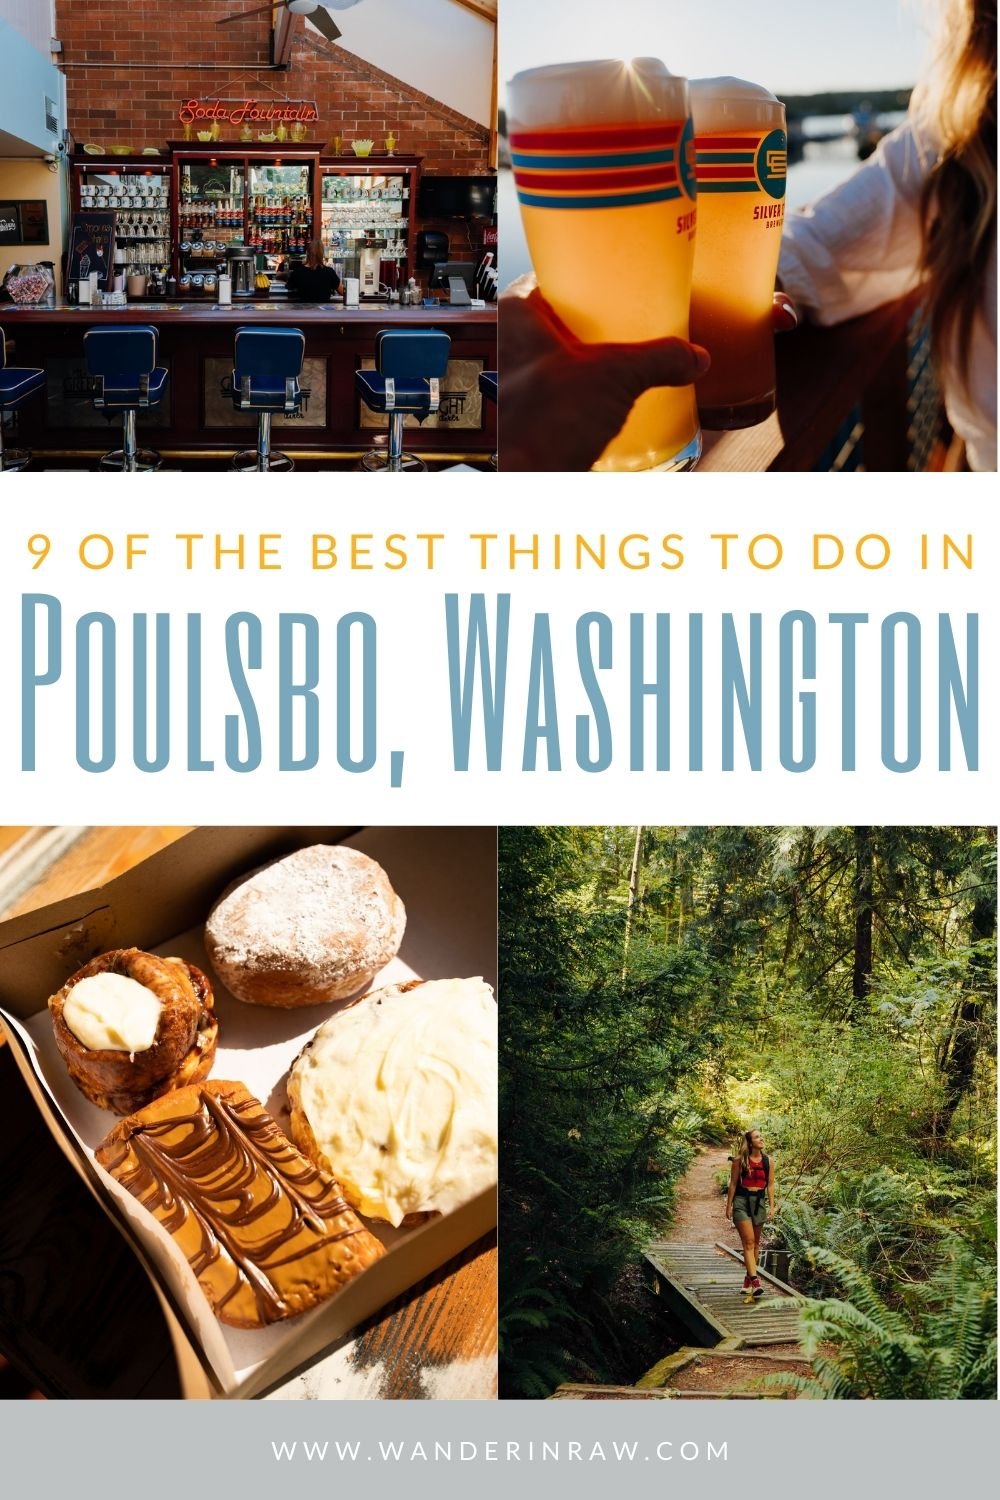 The Best Things to do in Poulsbo, WA